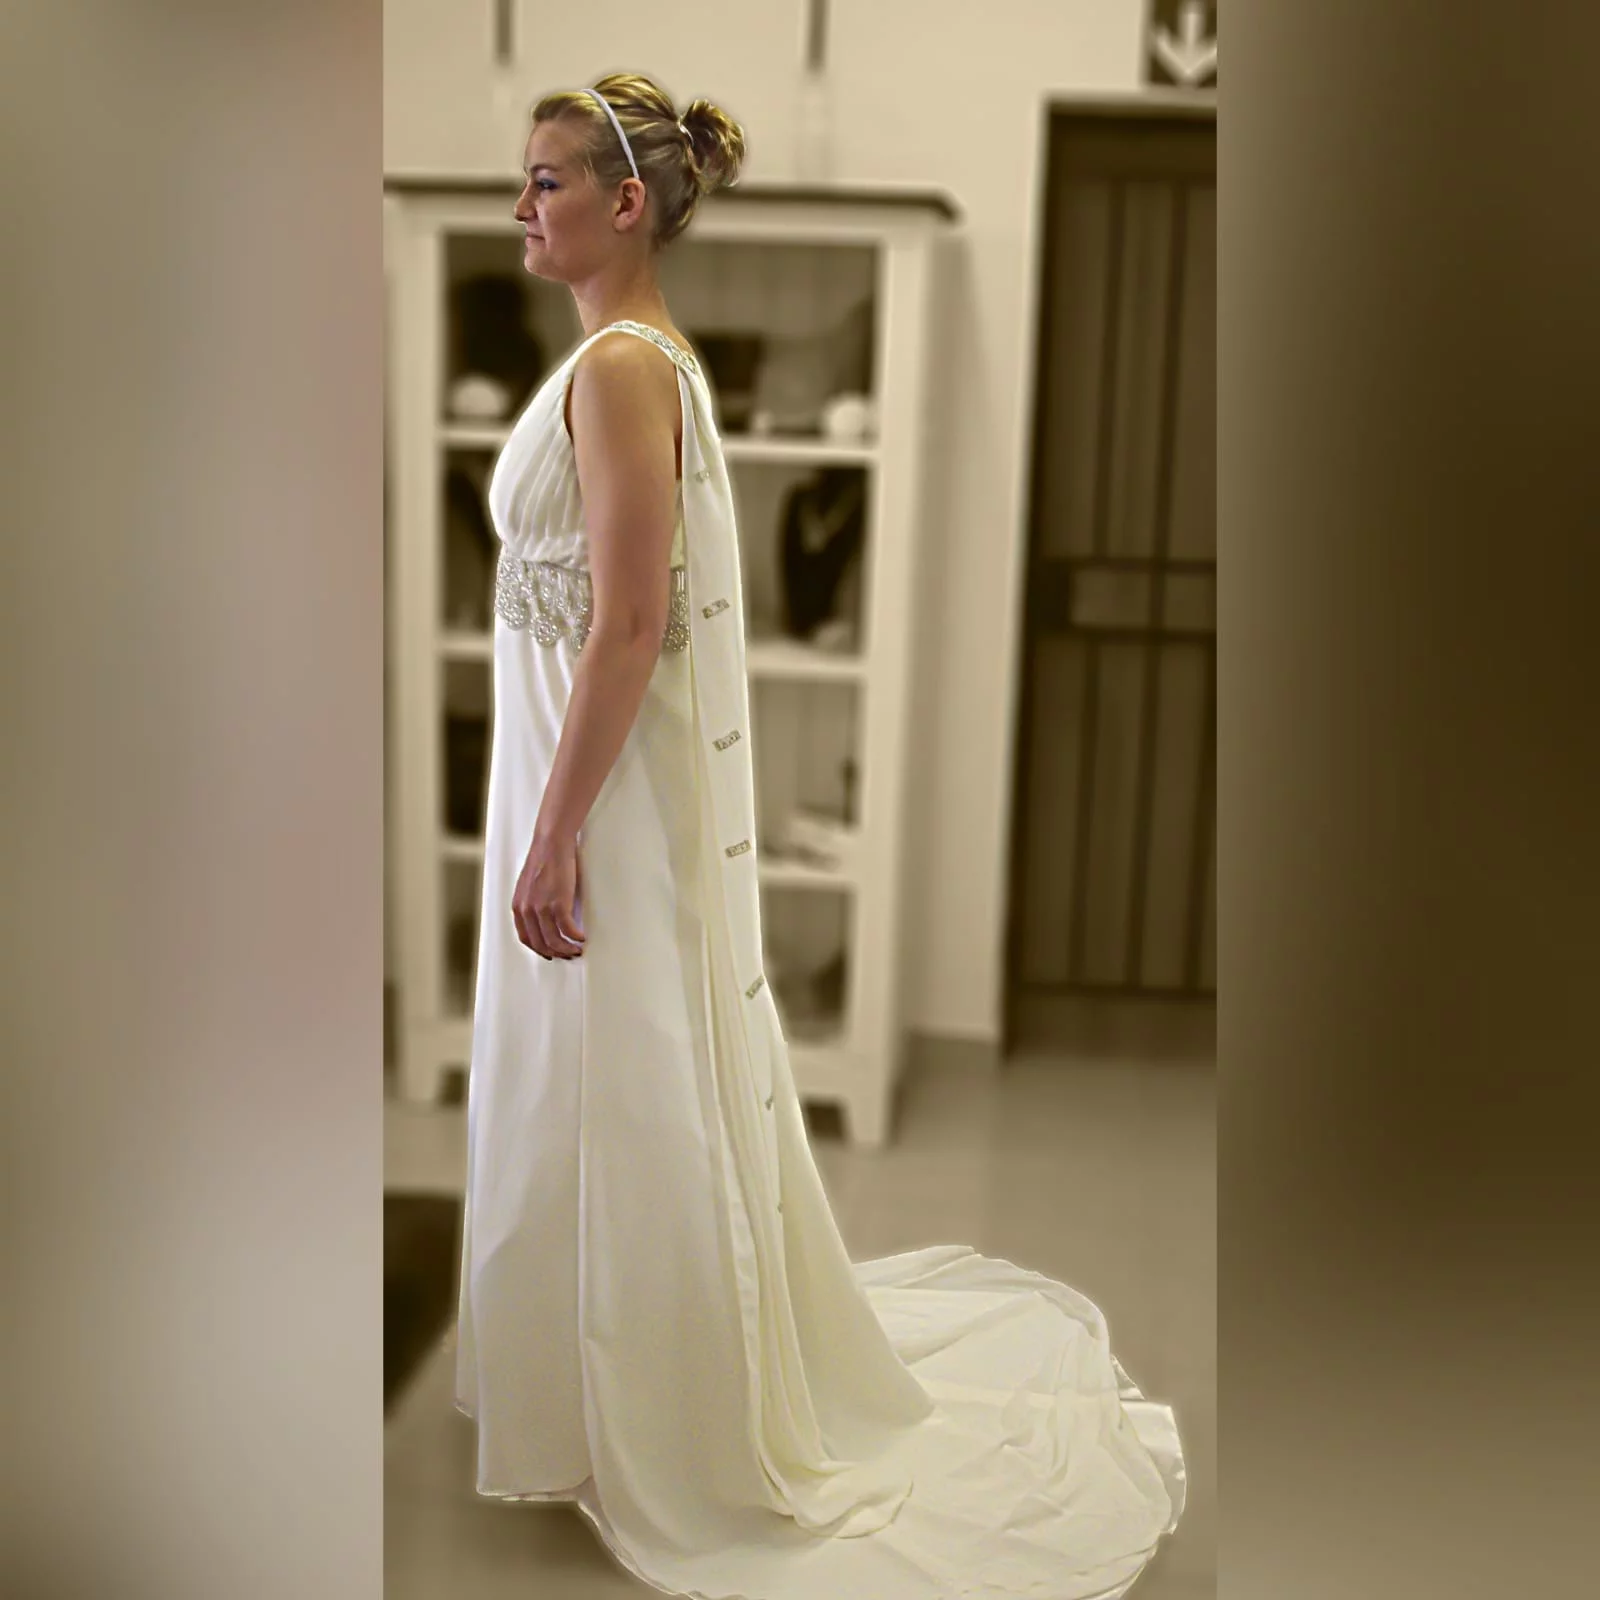 Ivory cross busted wedding dress with train 3 ivory cross busted wedding dress with an added back panel creating a train. Two long shoulder chiffon pieces decorated with bronze embroidery detail and under bust finish this wedding dress off.